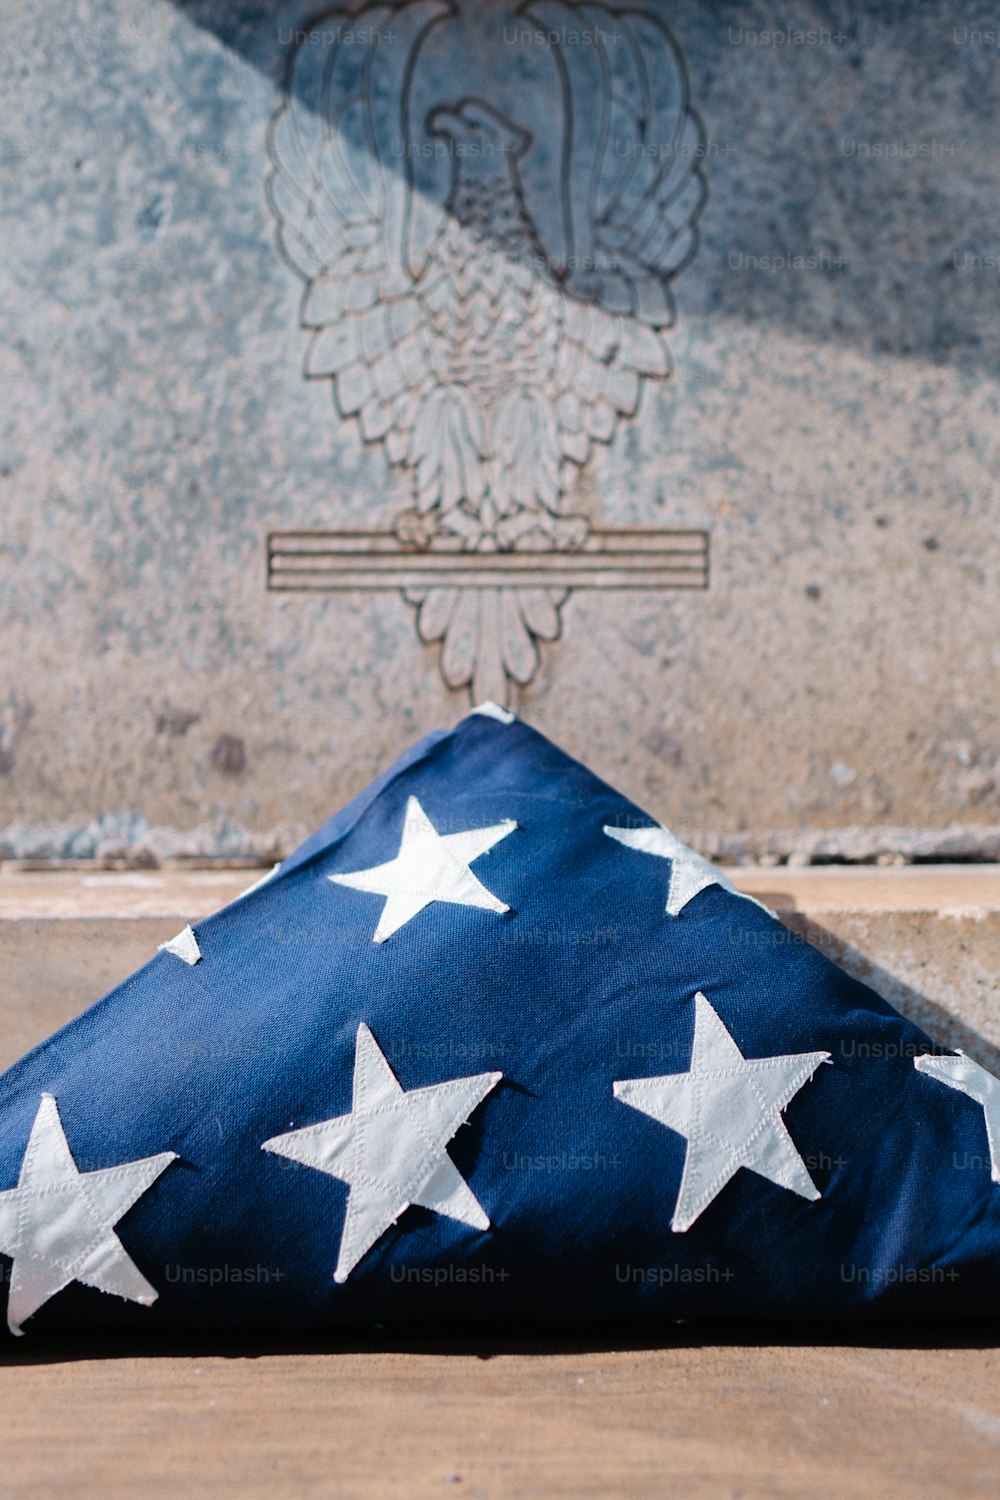 a flag laying on the ground in front of a monument